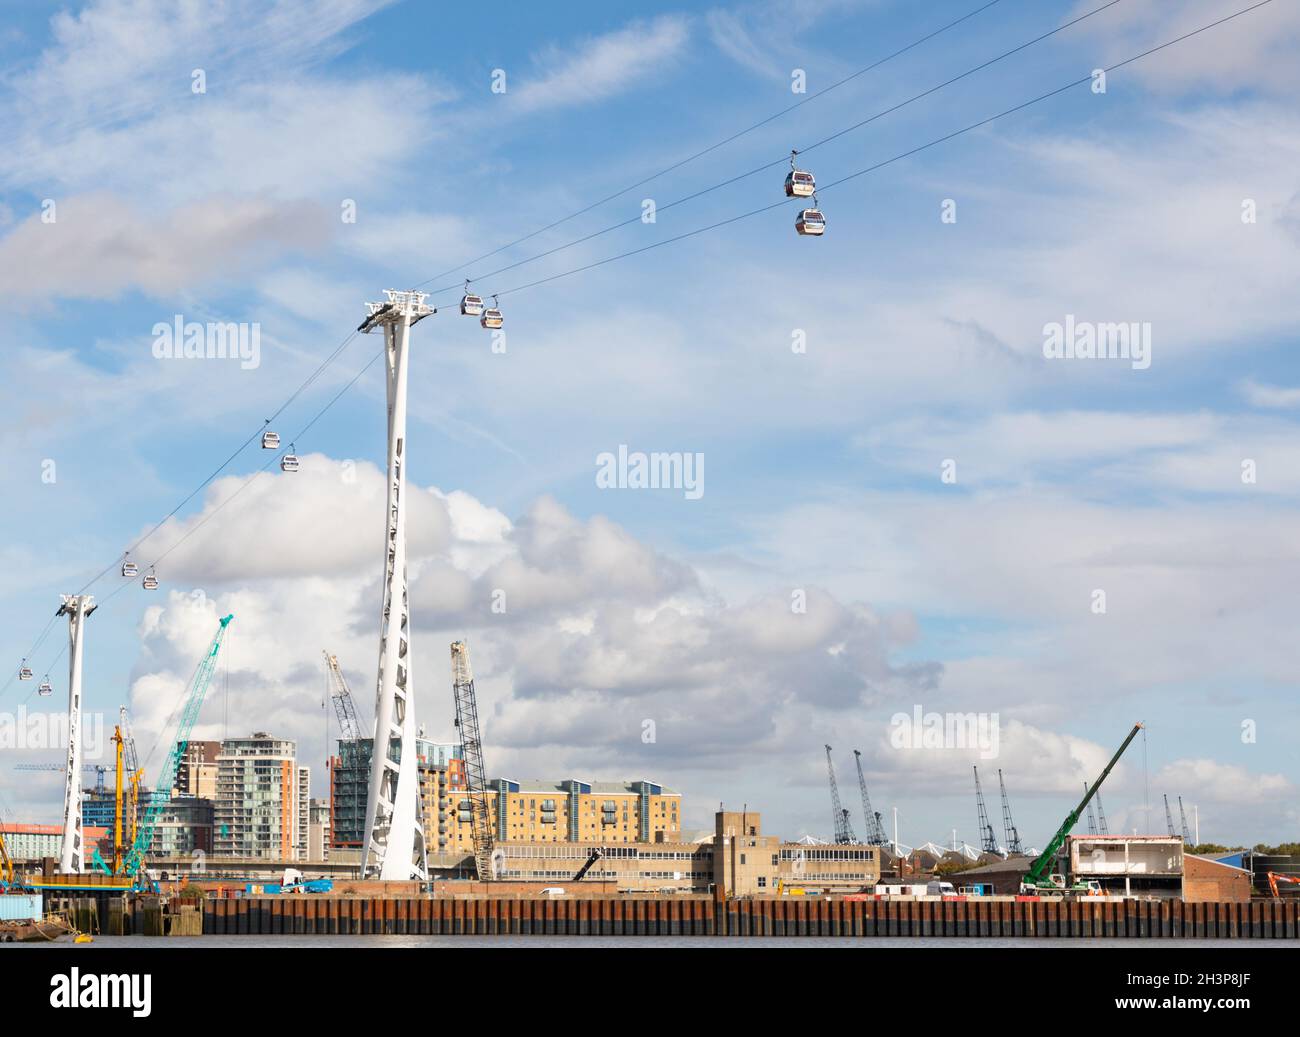 A pylon supprting the Emirates Air Line cable car link across the River Thames in London, England Stock Photo